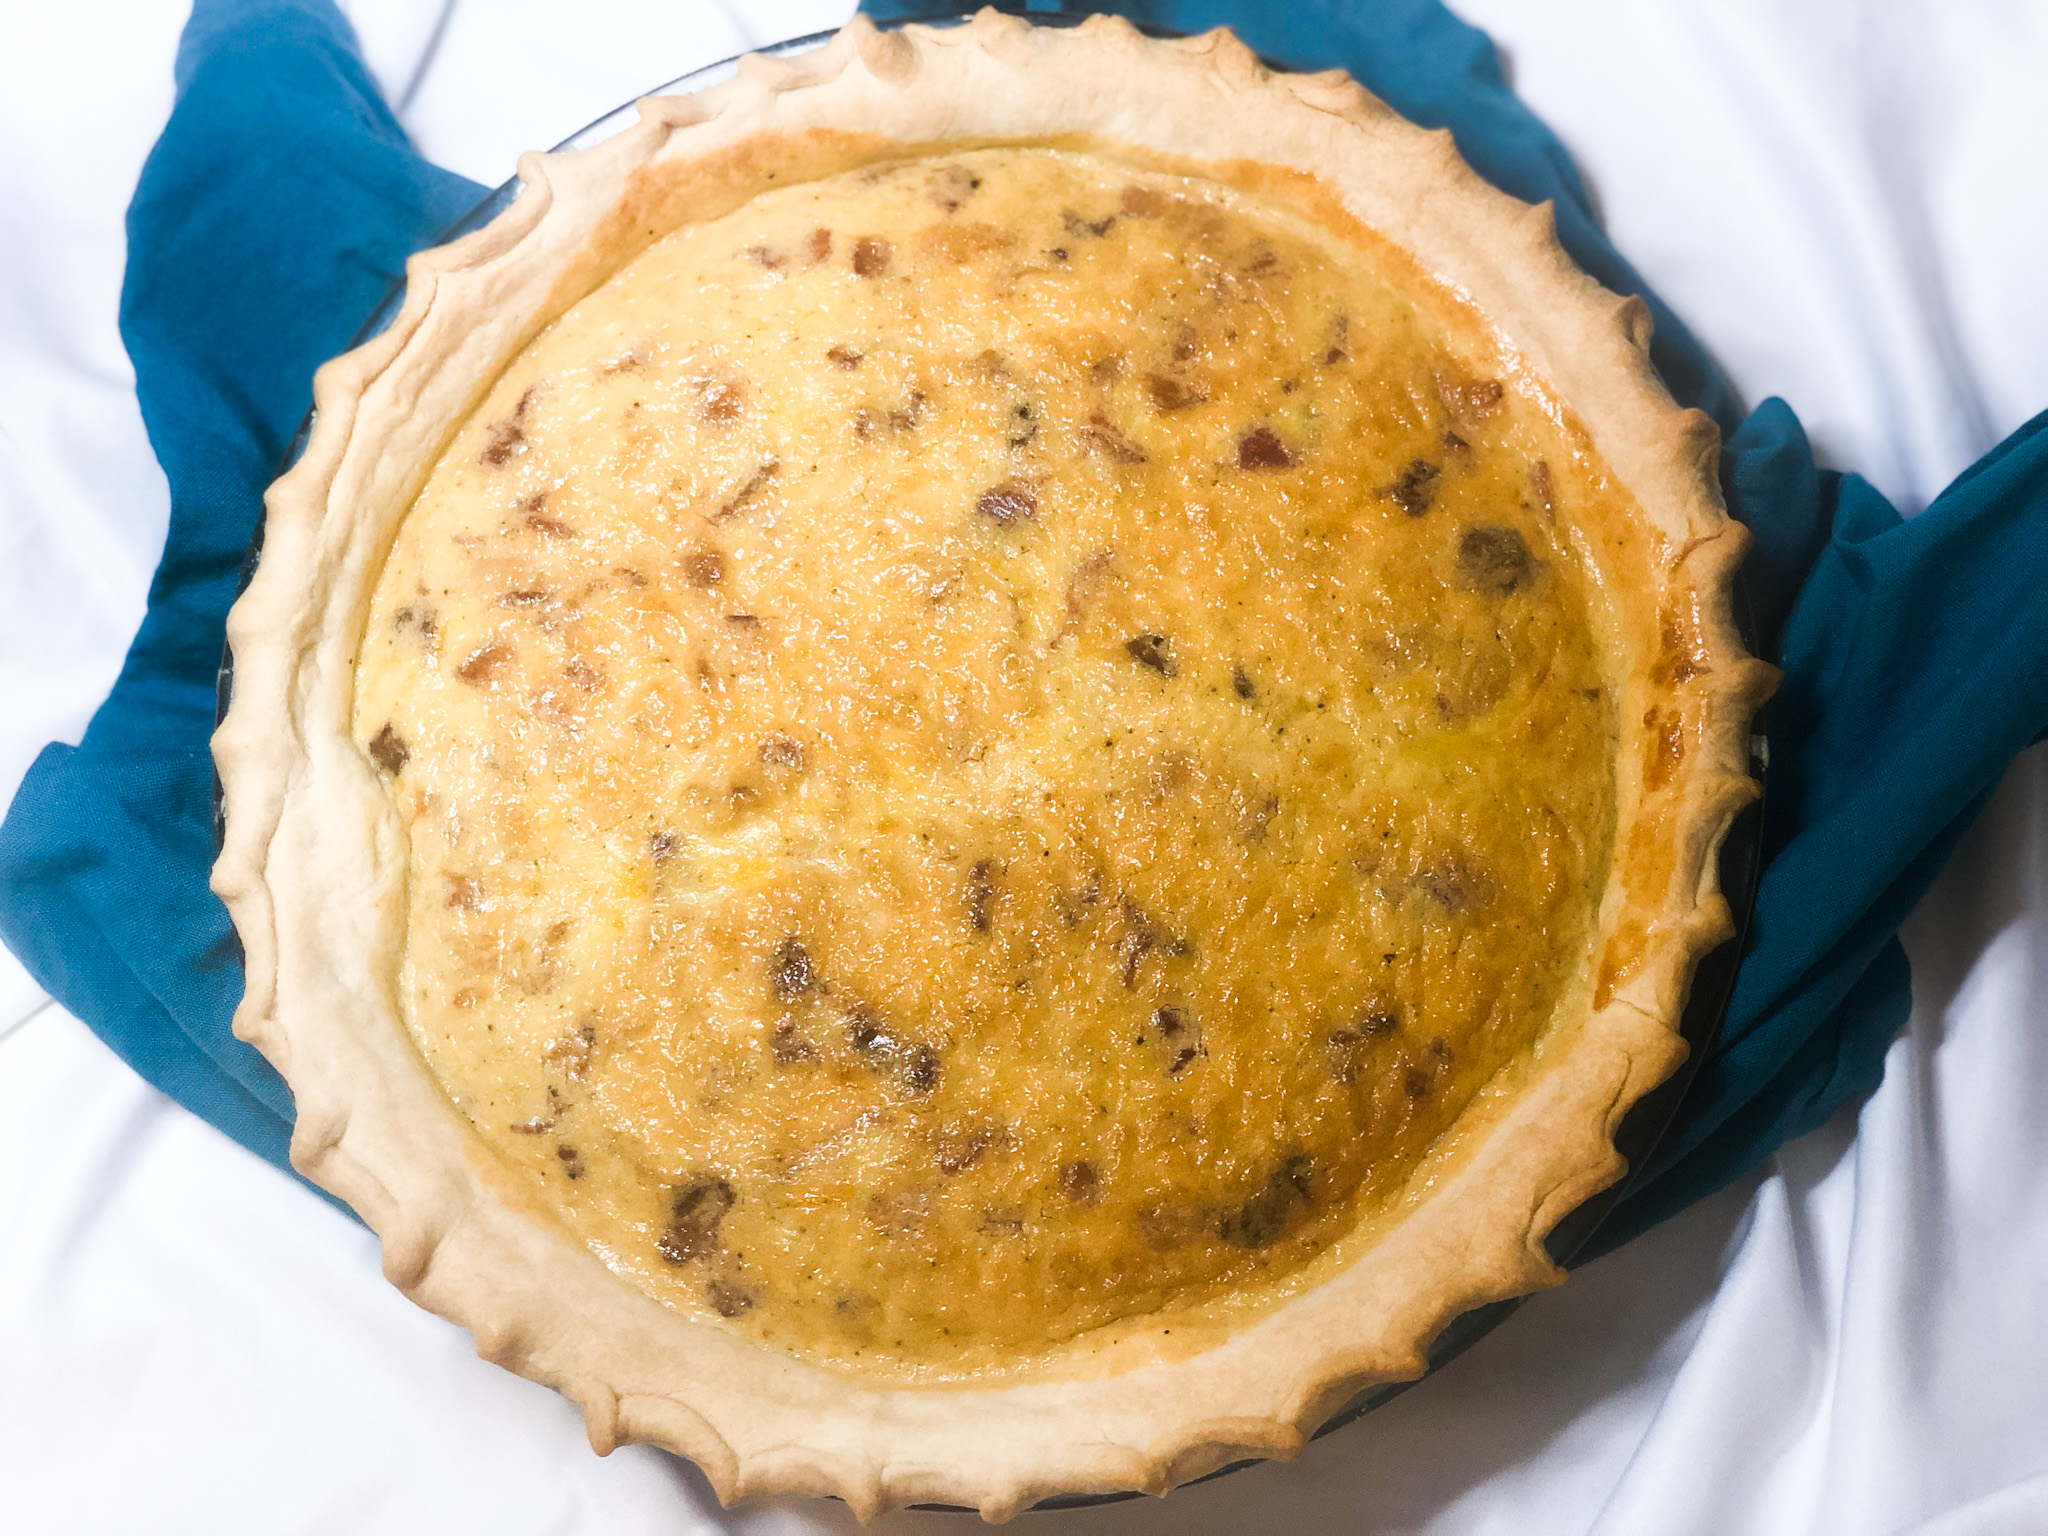 Cooked quiche